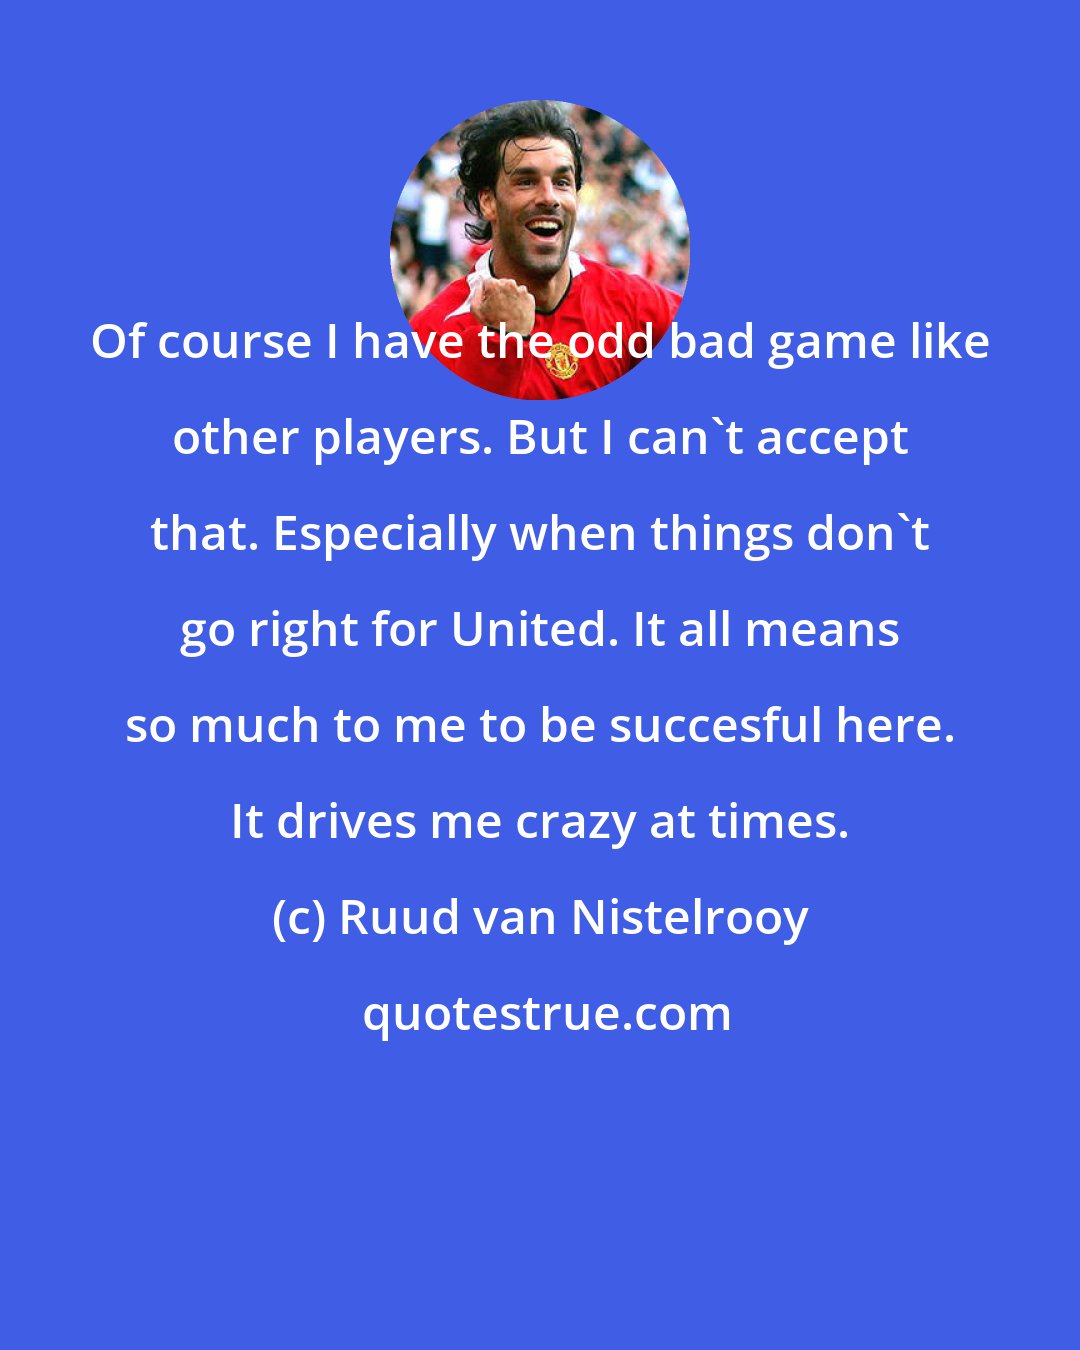 Ruud van Nistelrooy: Of course I have the odd bad game like other players. But I can't accept that. Especially when things don't go right for United. It all means so much to me to be succesful here. It drives me crazy at times.